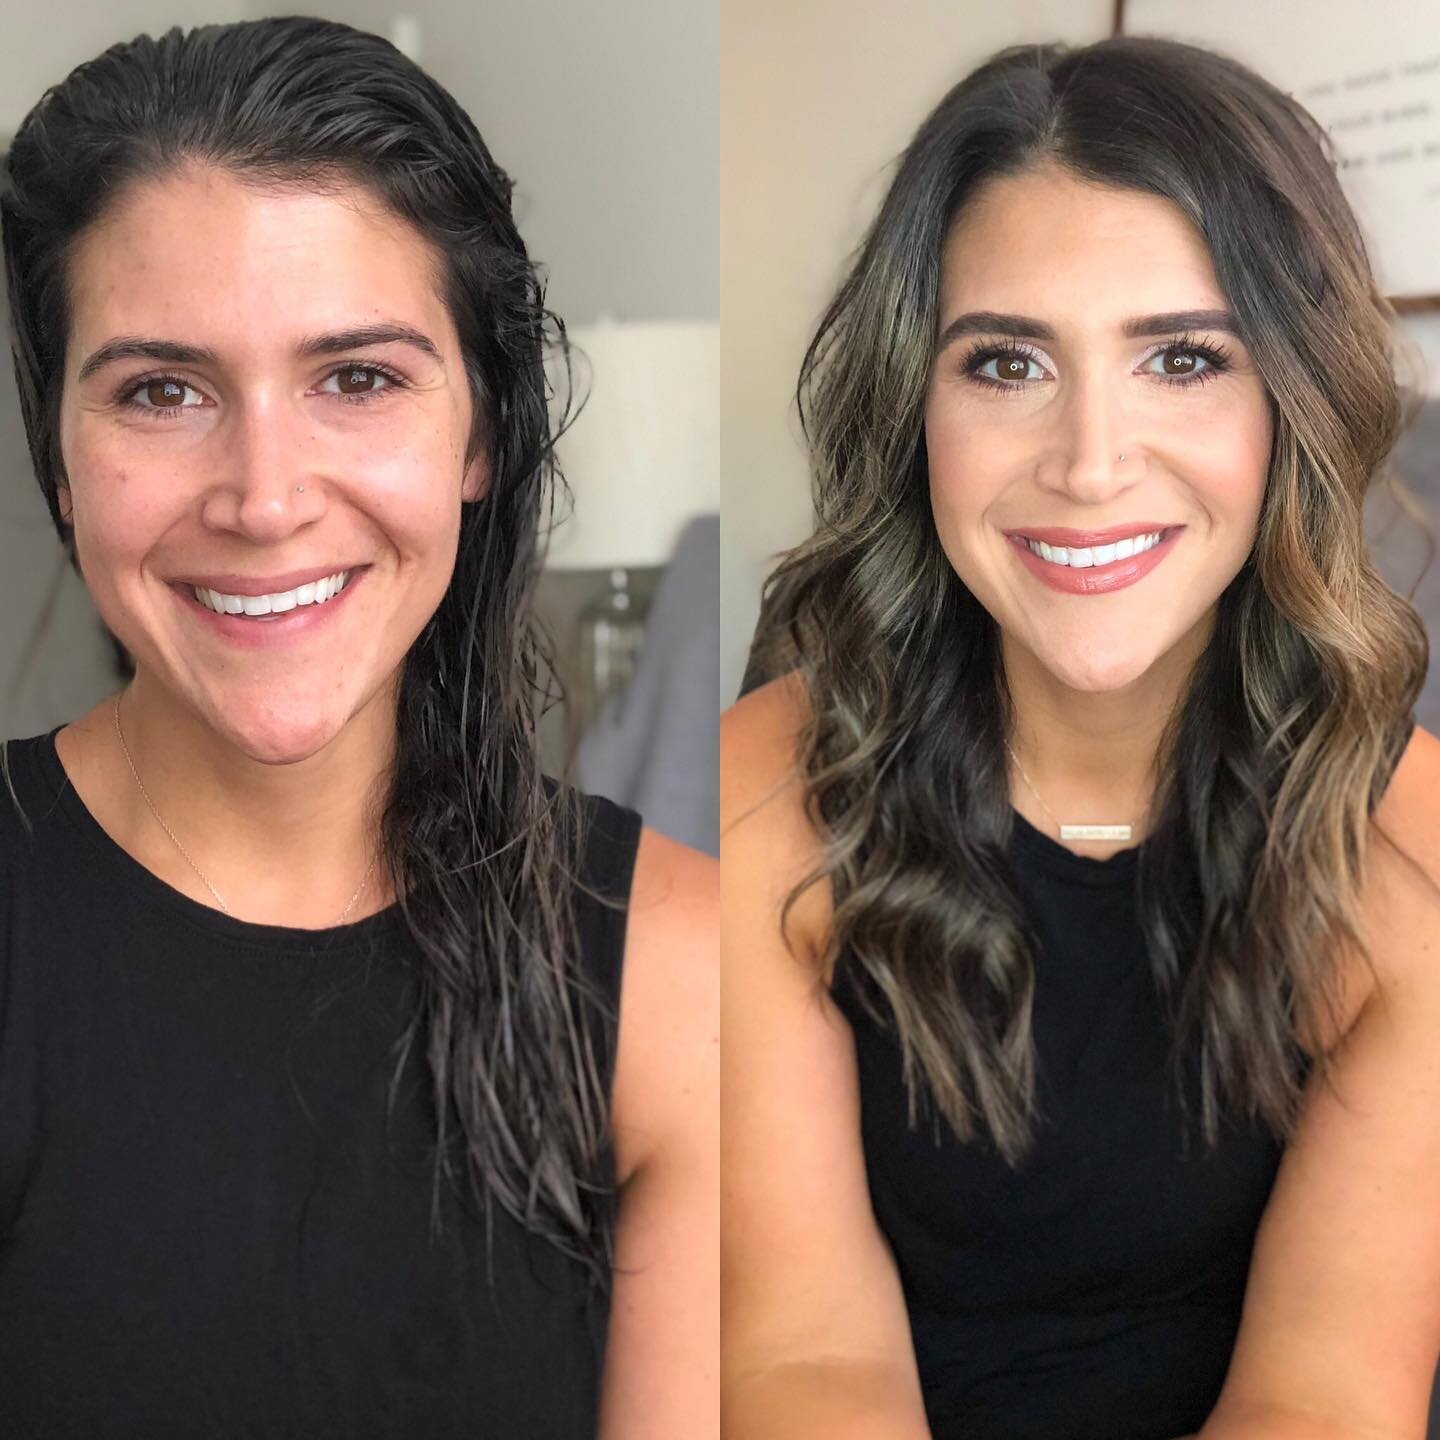 Got dolled up for date night tonight and thought it be fun to do a side-by-side. I love a good before and after! Oh, the power of makeup💄 Have a great Labor Day weekend, everyone! 😘
.
.
#beforeandafter #glowup #powerofmakeup #makeup #makeupfree #na